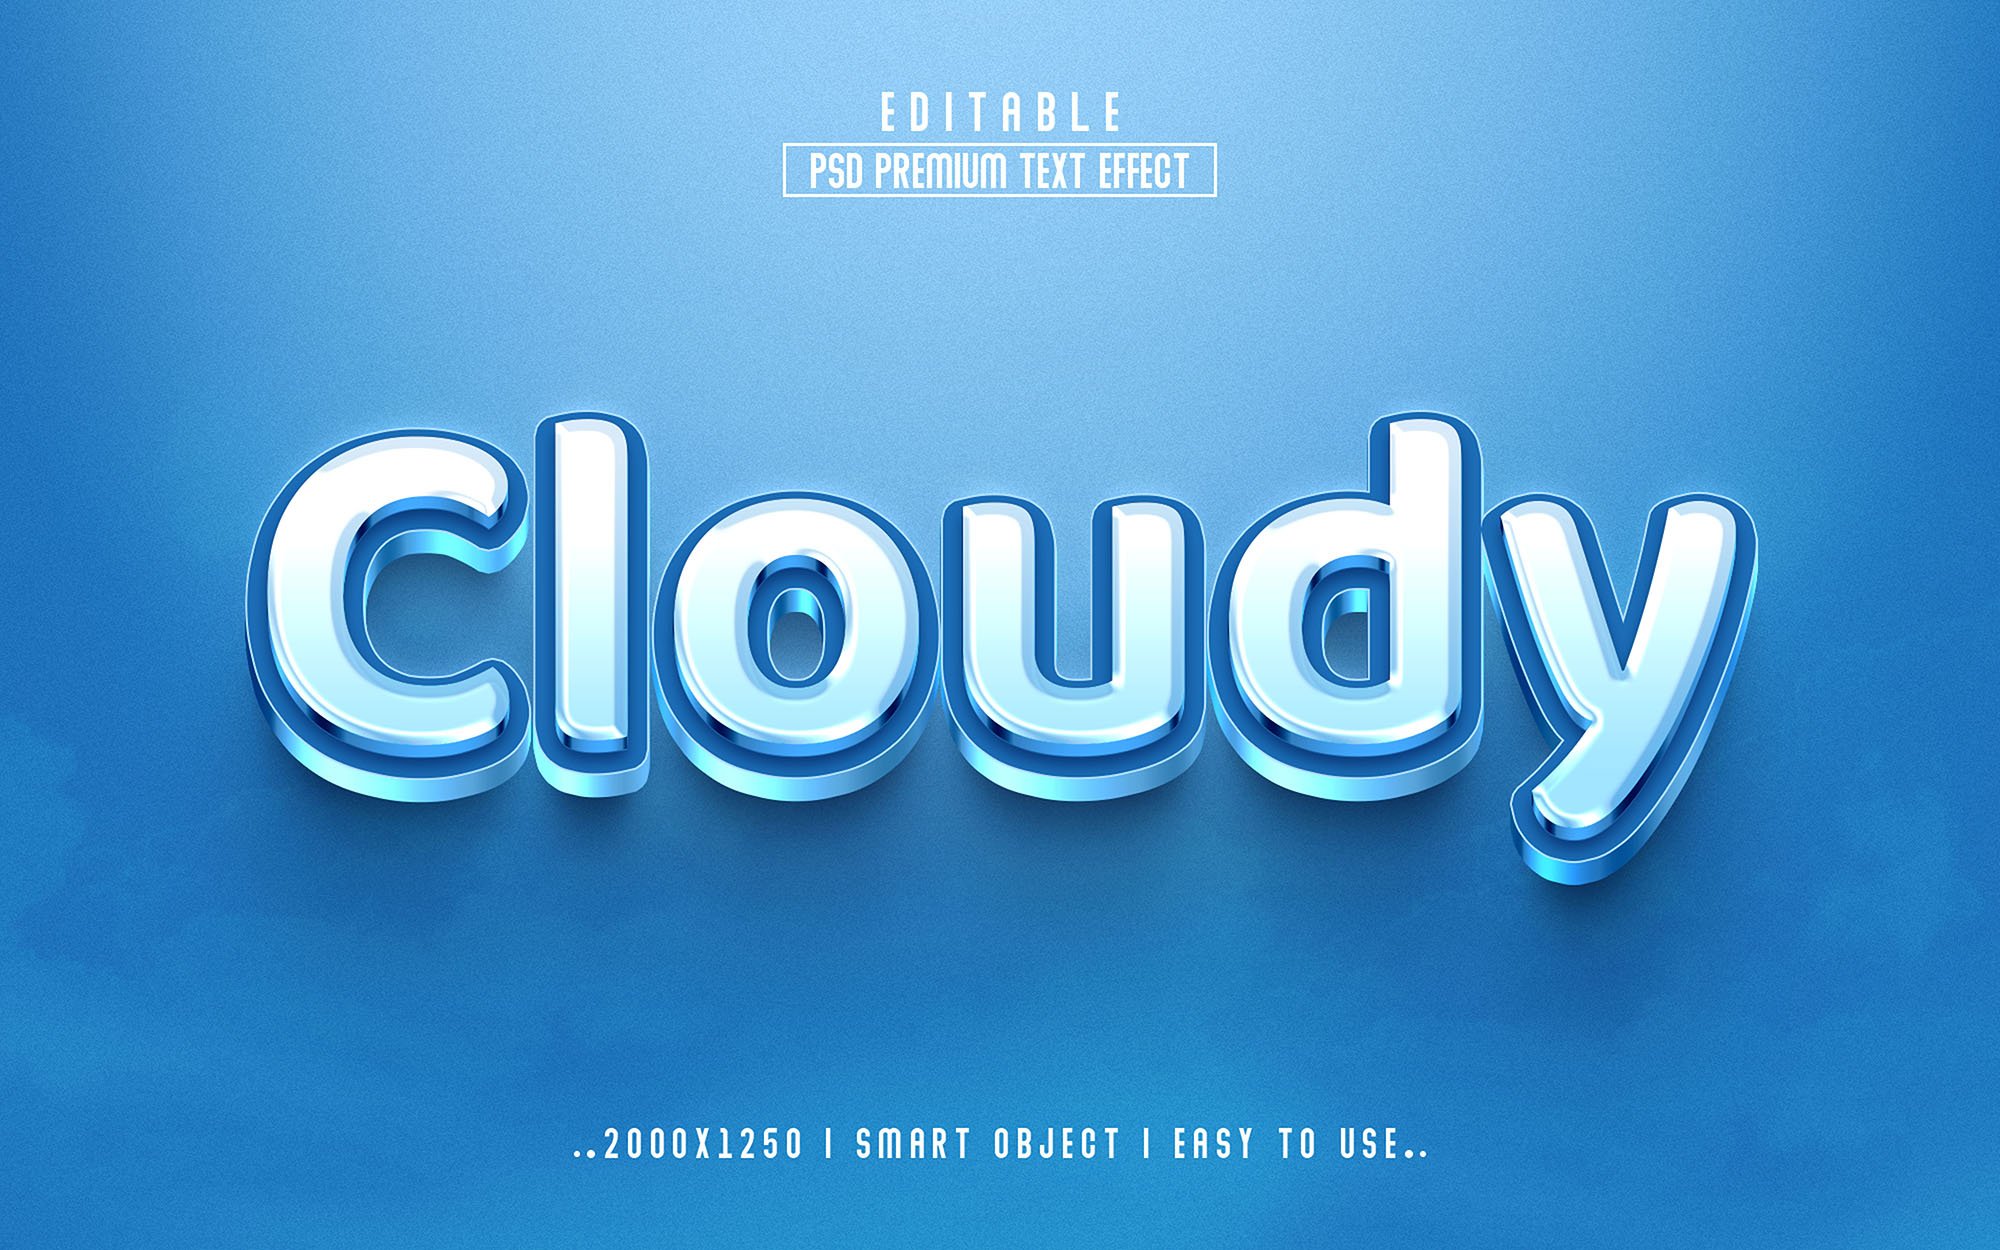 Cloudy 3D Editable Text Effect Stylecover image.